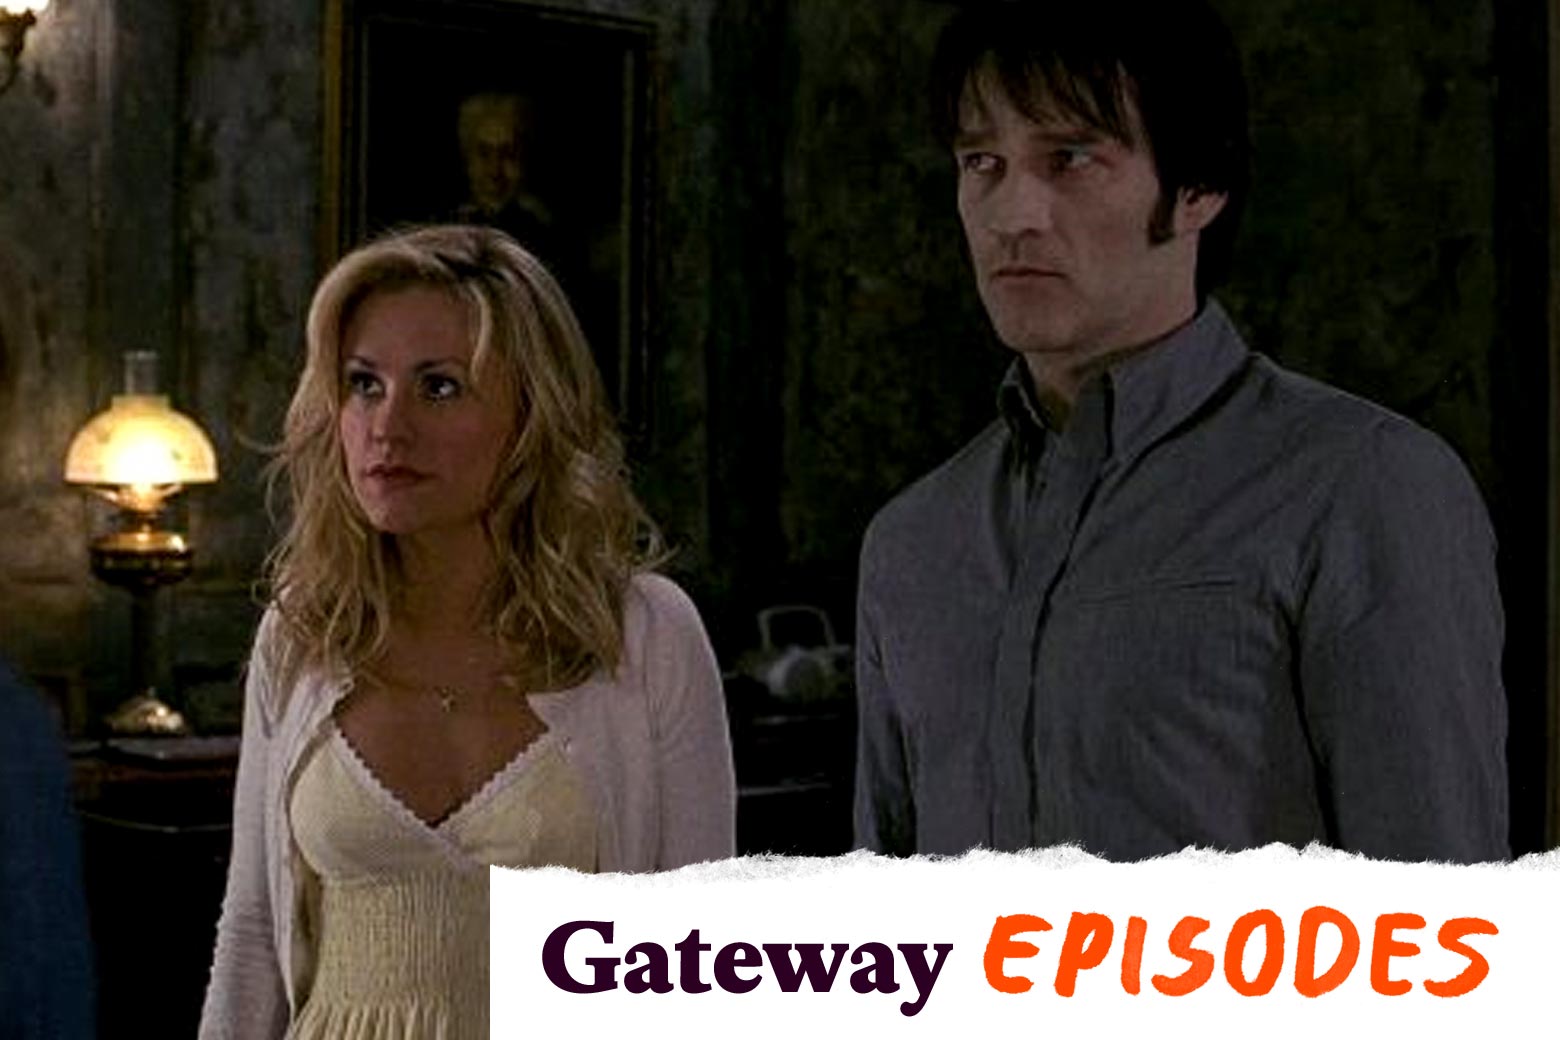 Anna Paquin and Stephen Moyer. A tearaway logo in the bottom right reads "Gateway Episodes."